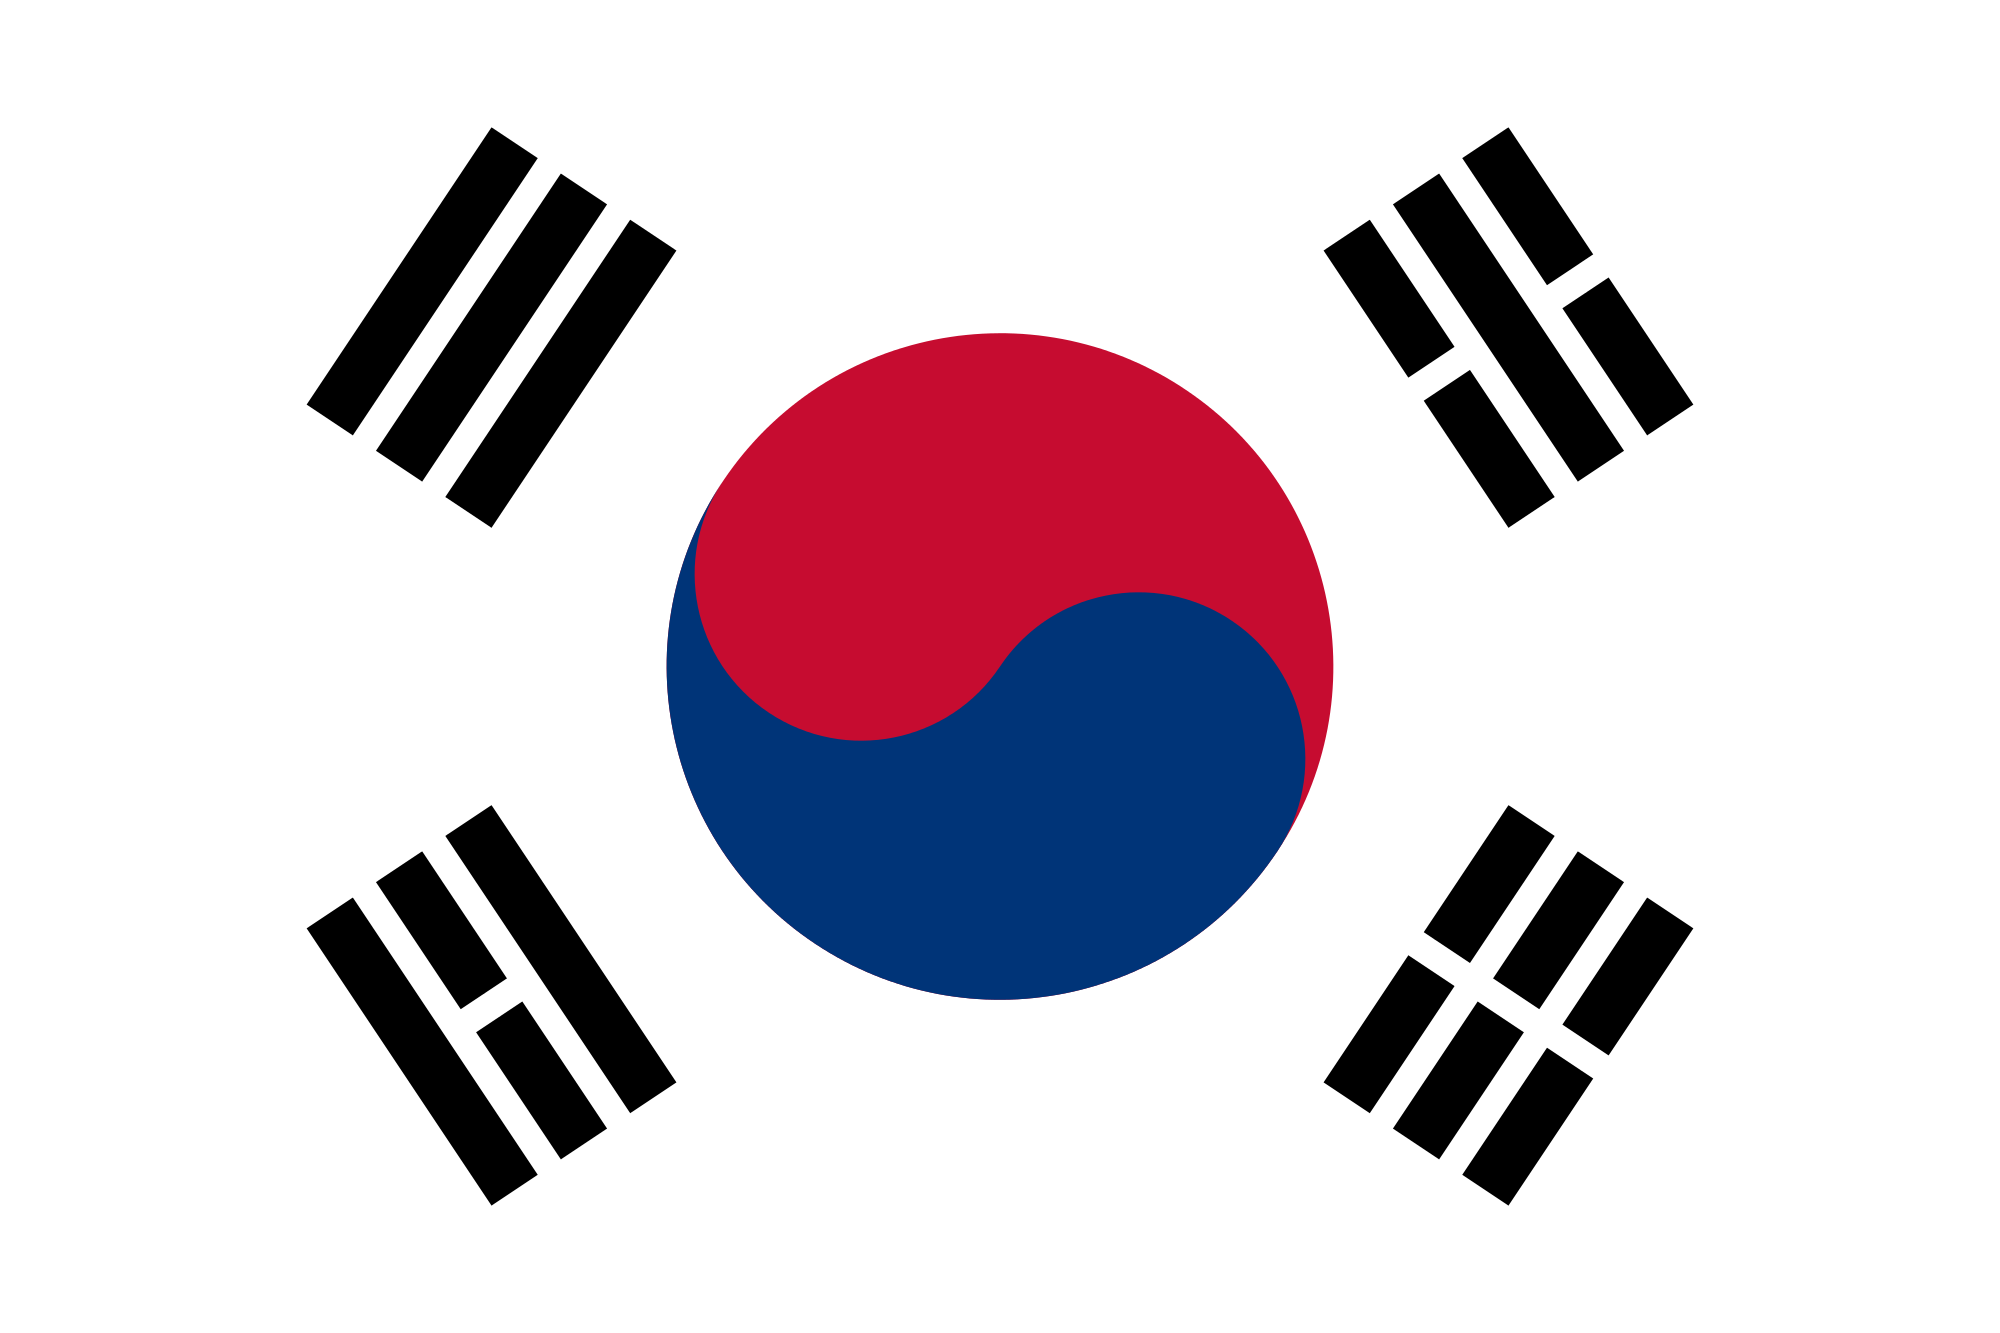   Also called Taekkuk (referring to the Yin and Yang halves of the circle in the center of the flag) the Korean flag exudes balance and harmony.   The red and blue circle in the center is called 'Taeguk', the origin of all things in the universe. The